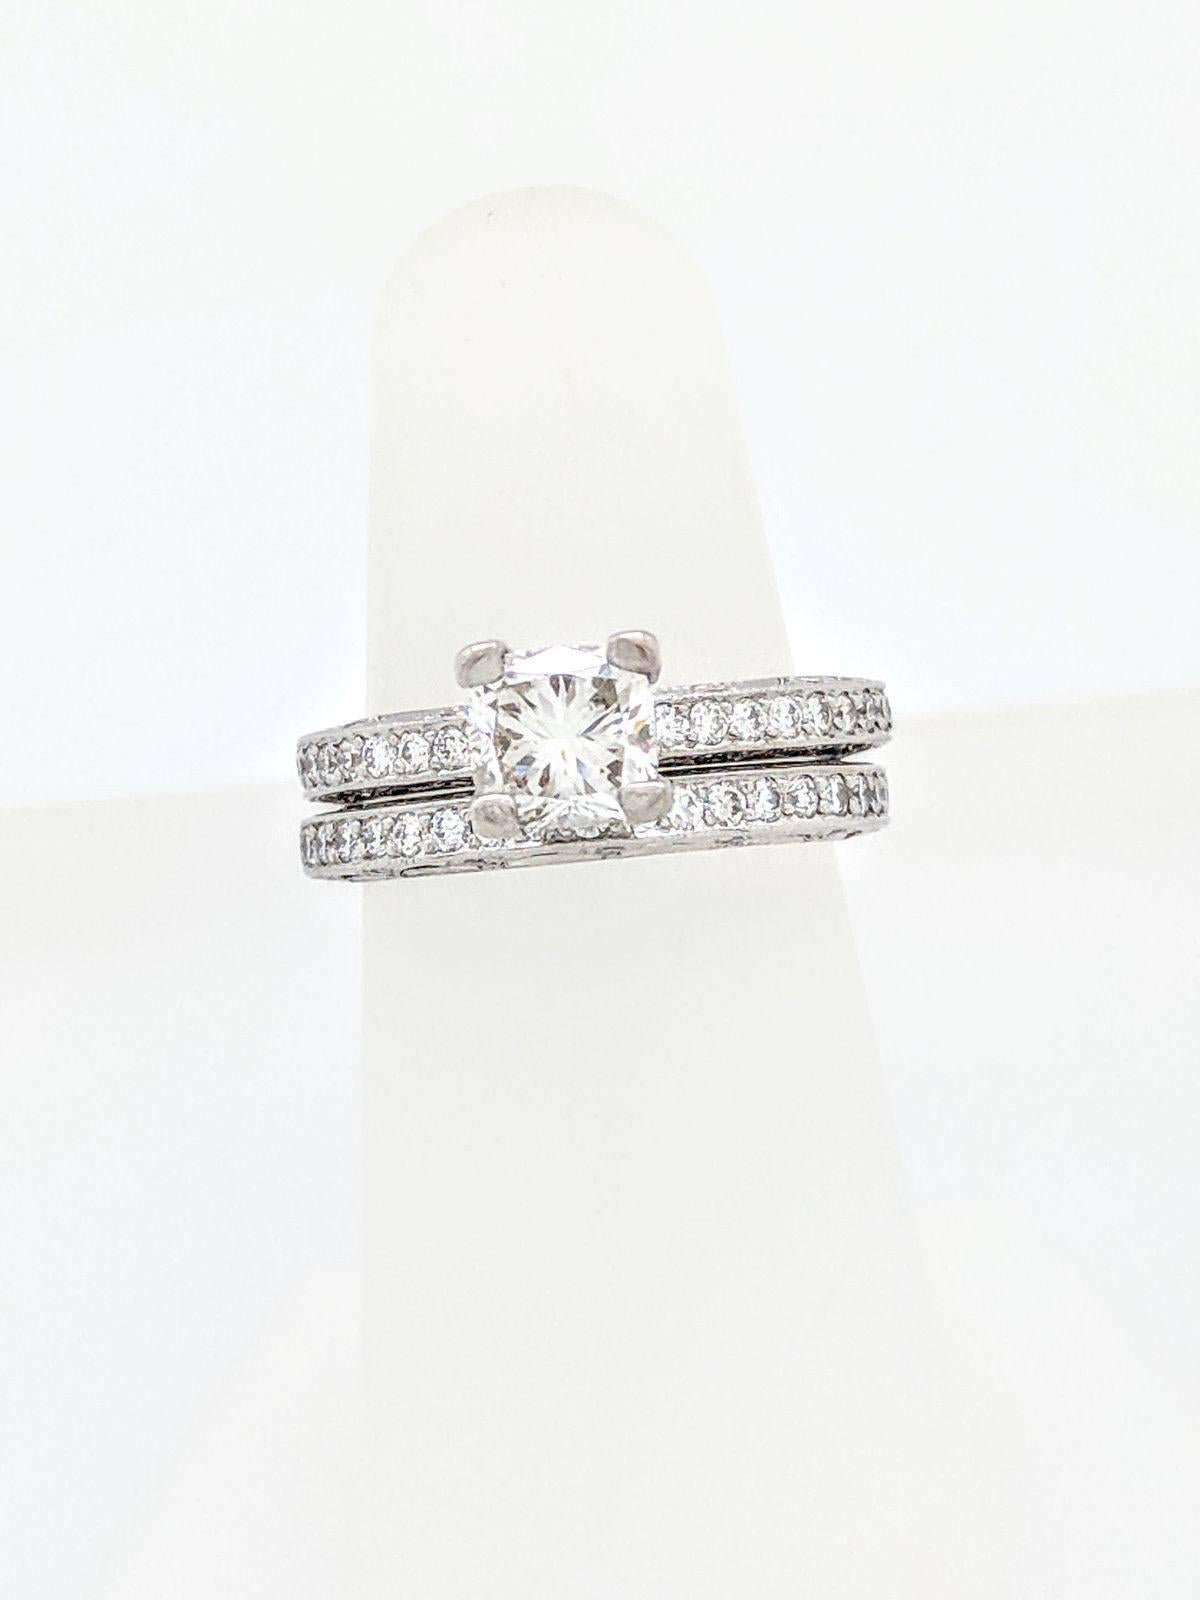 Platinum Tacori 1.05ct Cushion Cut Diamond Engagement Ring with Matching Band SI1/G

You are viewing a beautiful 1.05ct natural cushion cut diamond wedding set. We estimate the diamond to be SI1 in clarity and G color.
The diamond is beautifully